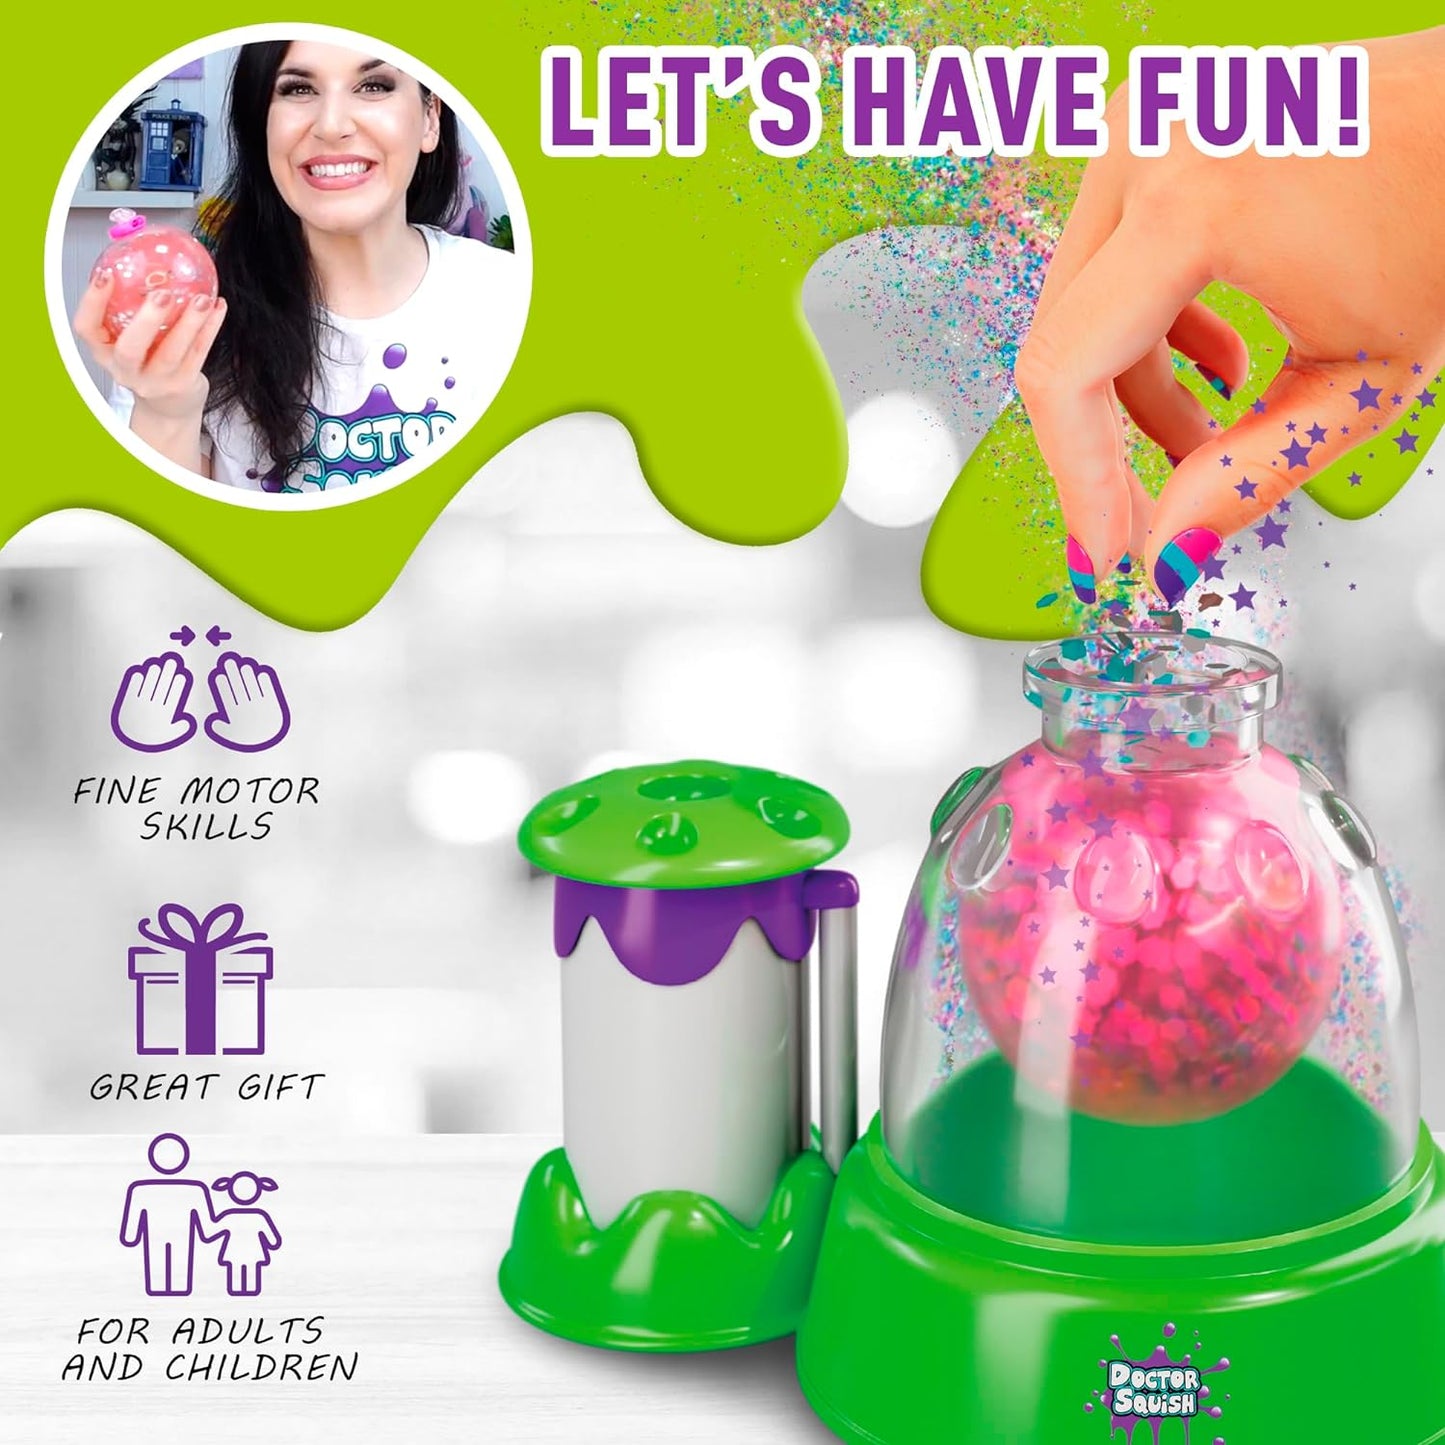 : Squishy Maker, New Shiny Glitter Station Maker, Decorate with Confetti, Sparkles & Colored Ink, Variety of Sizes, Just Add Water to Make Your Own Slime, for Ages 8 & Up